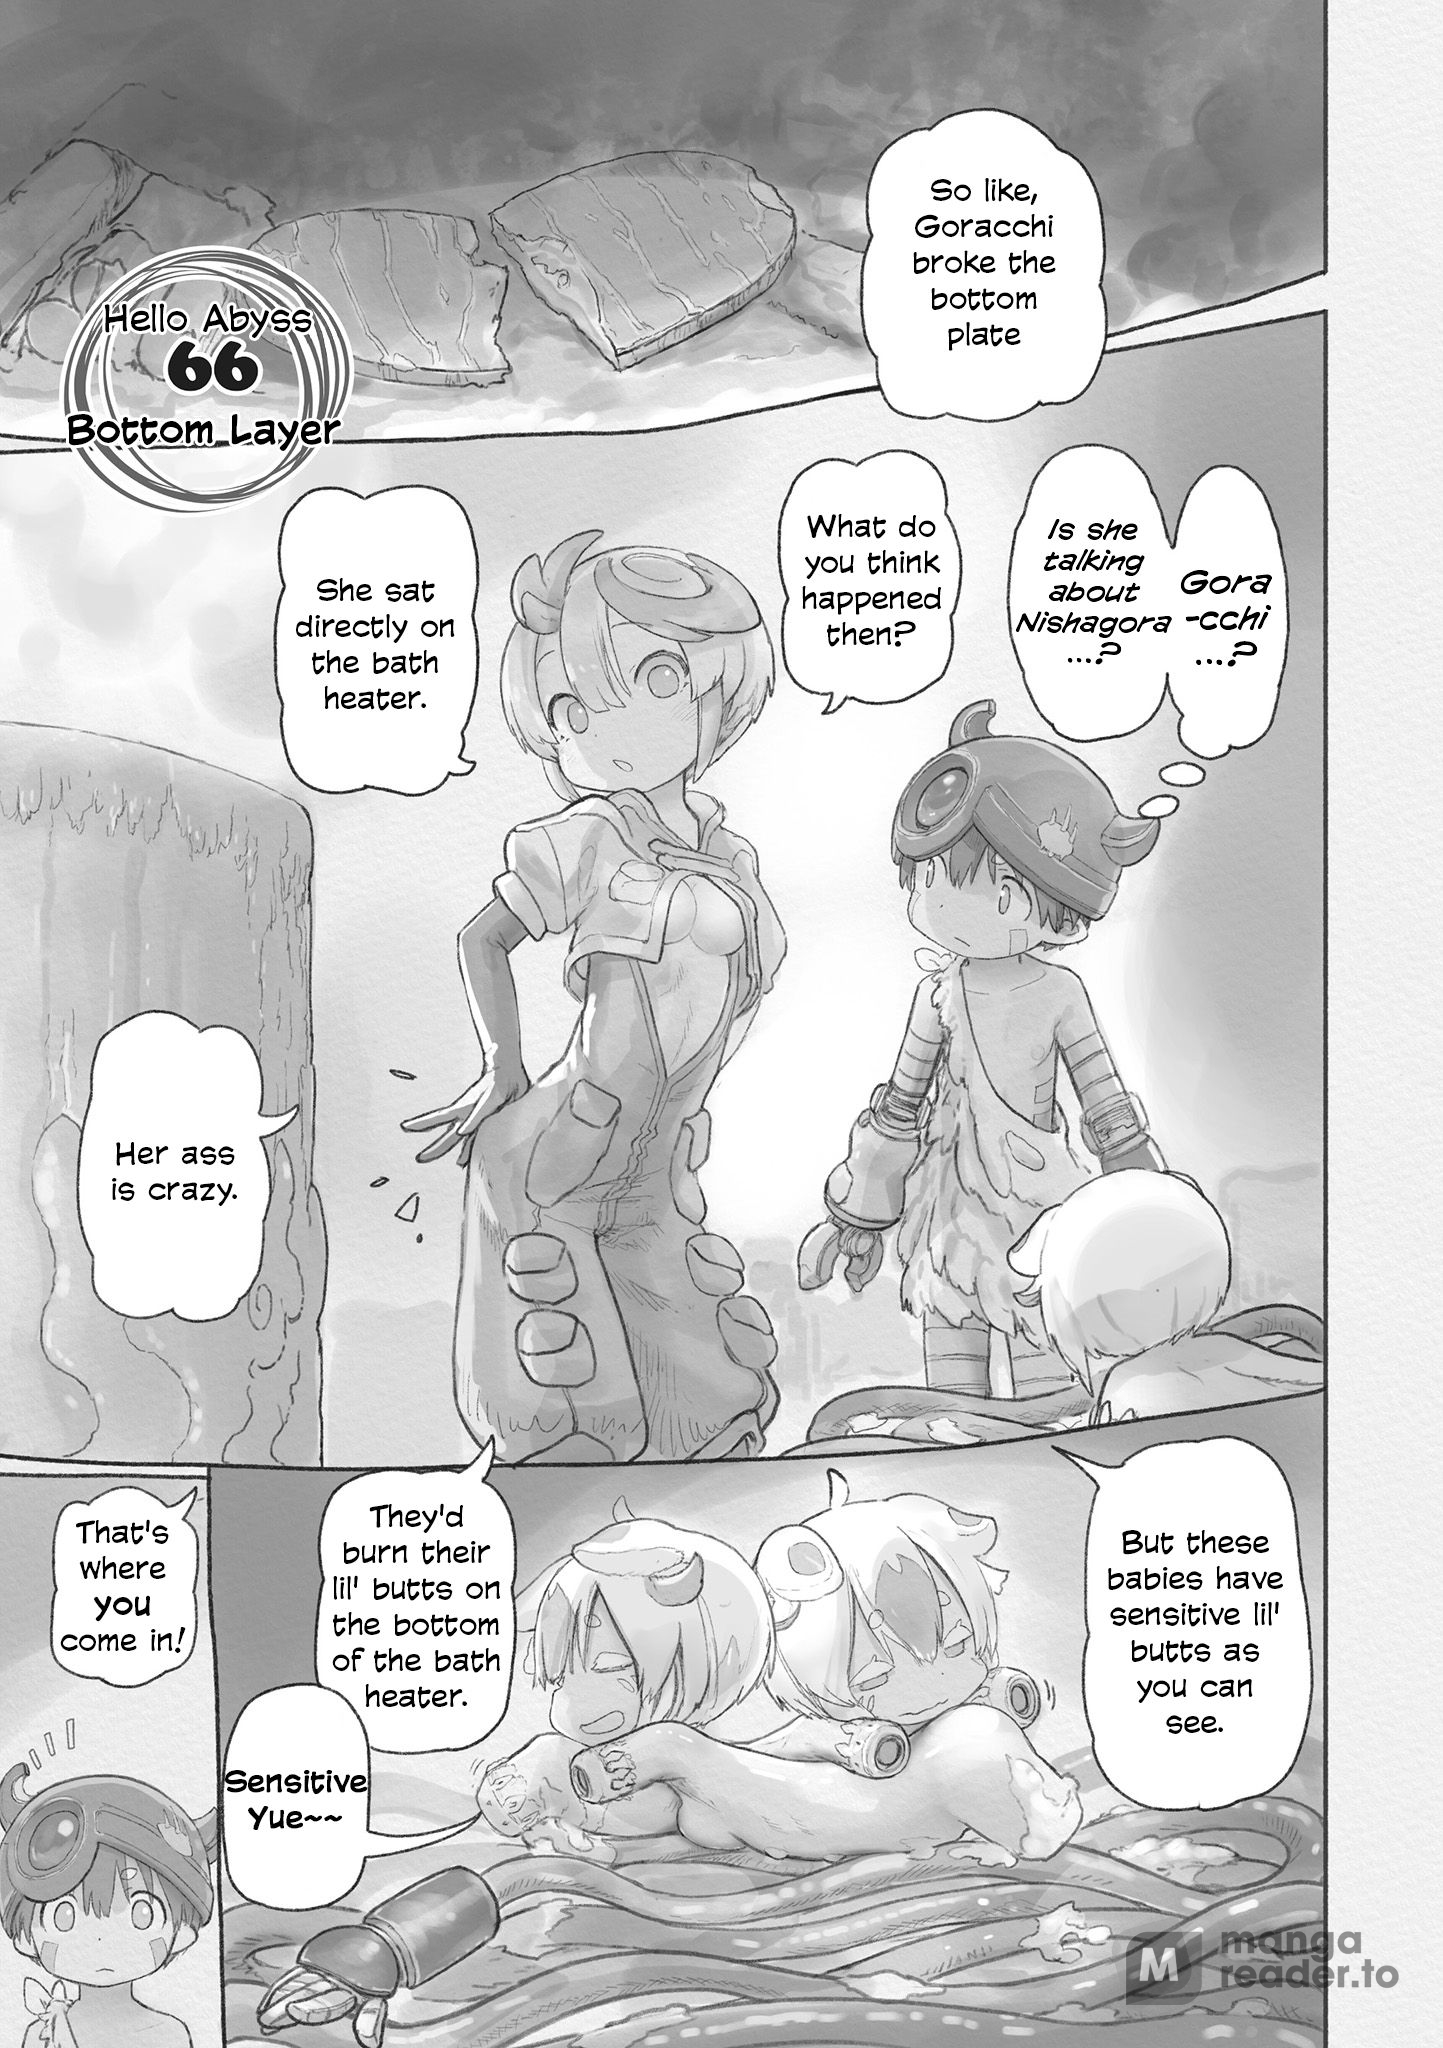 Made in Abyss Manga Online